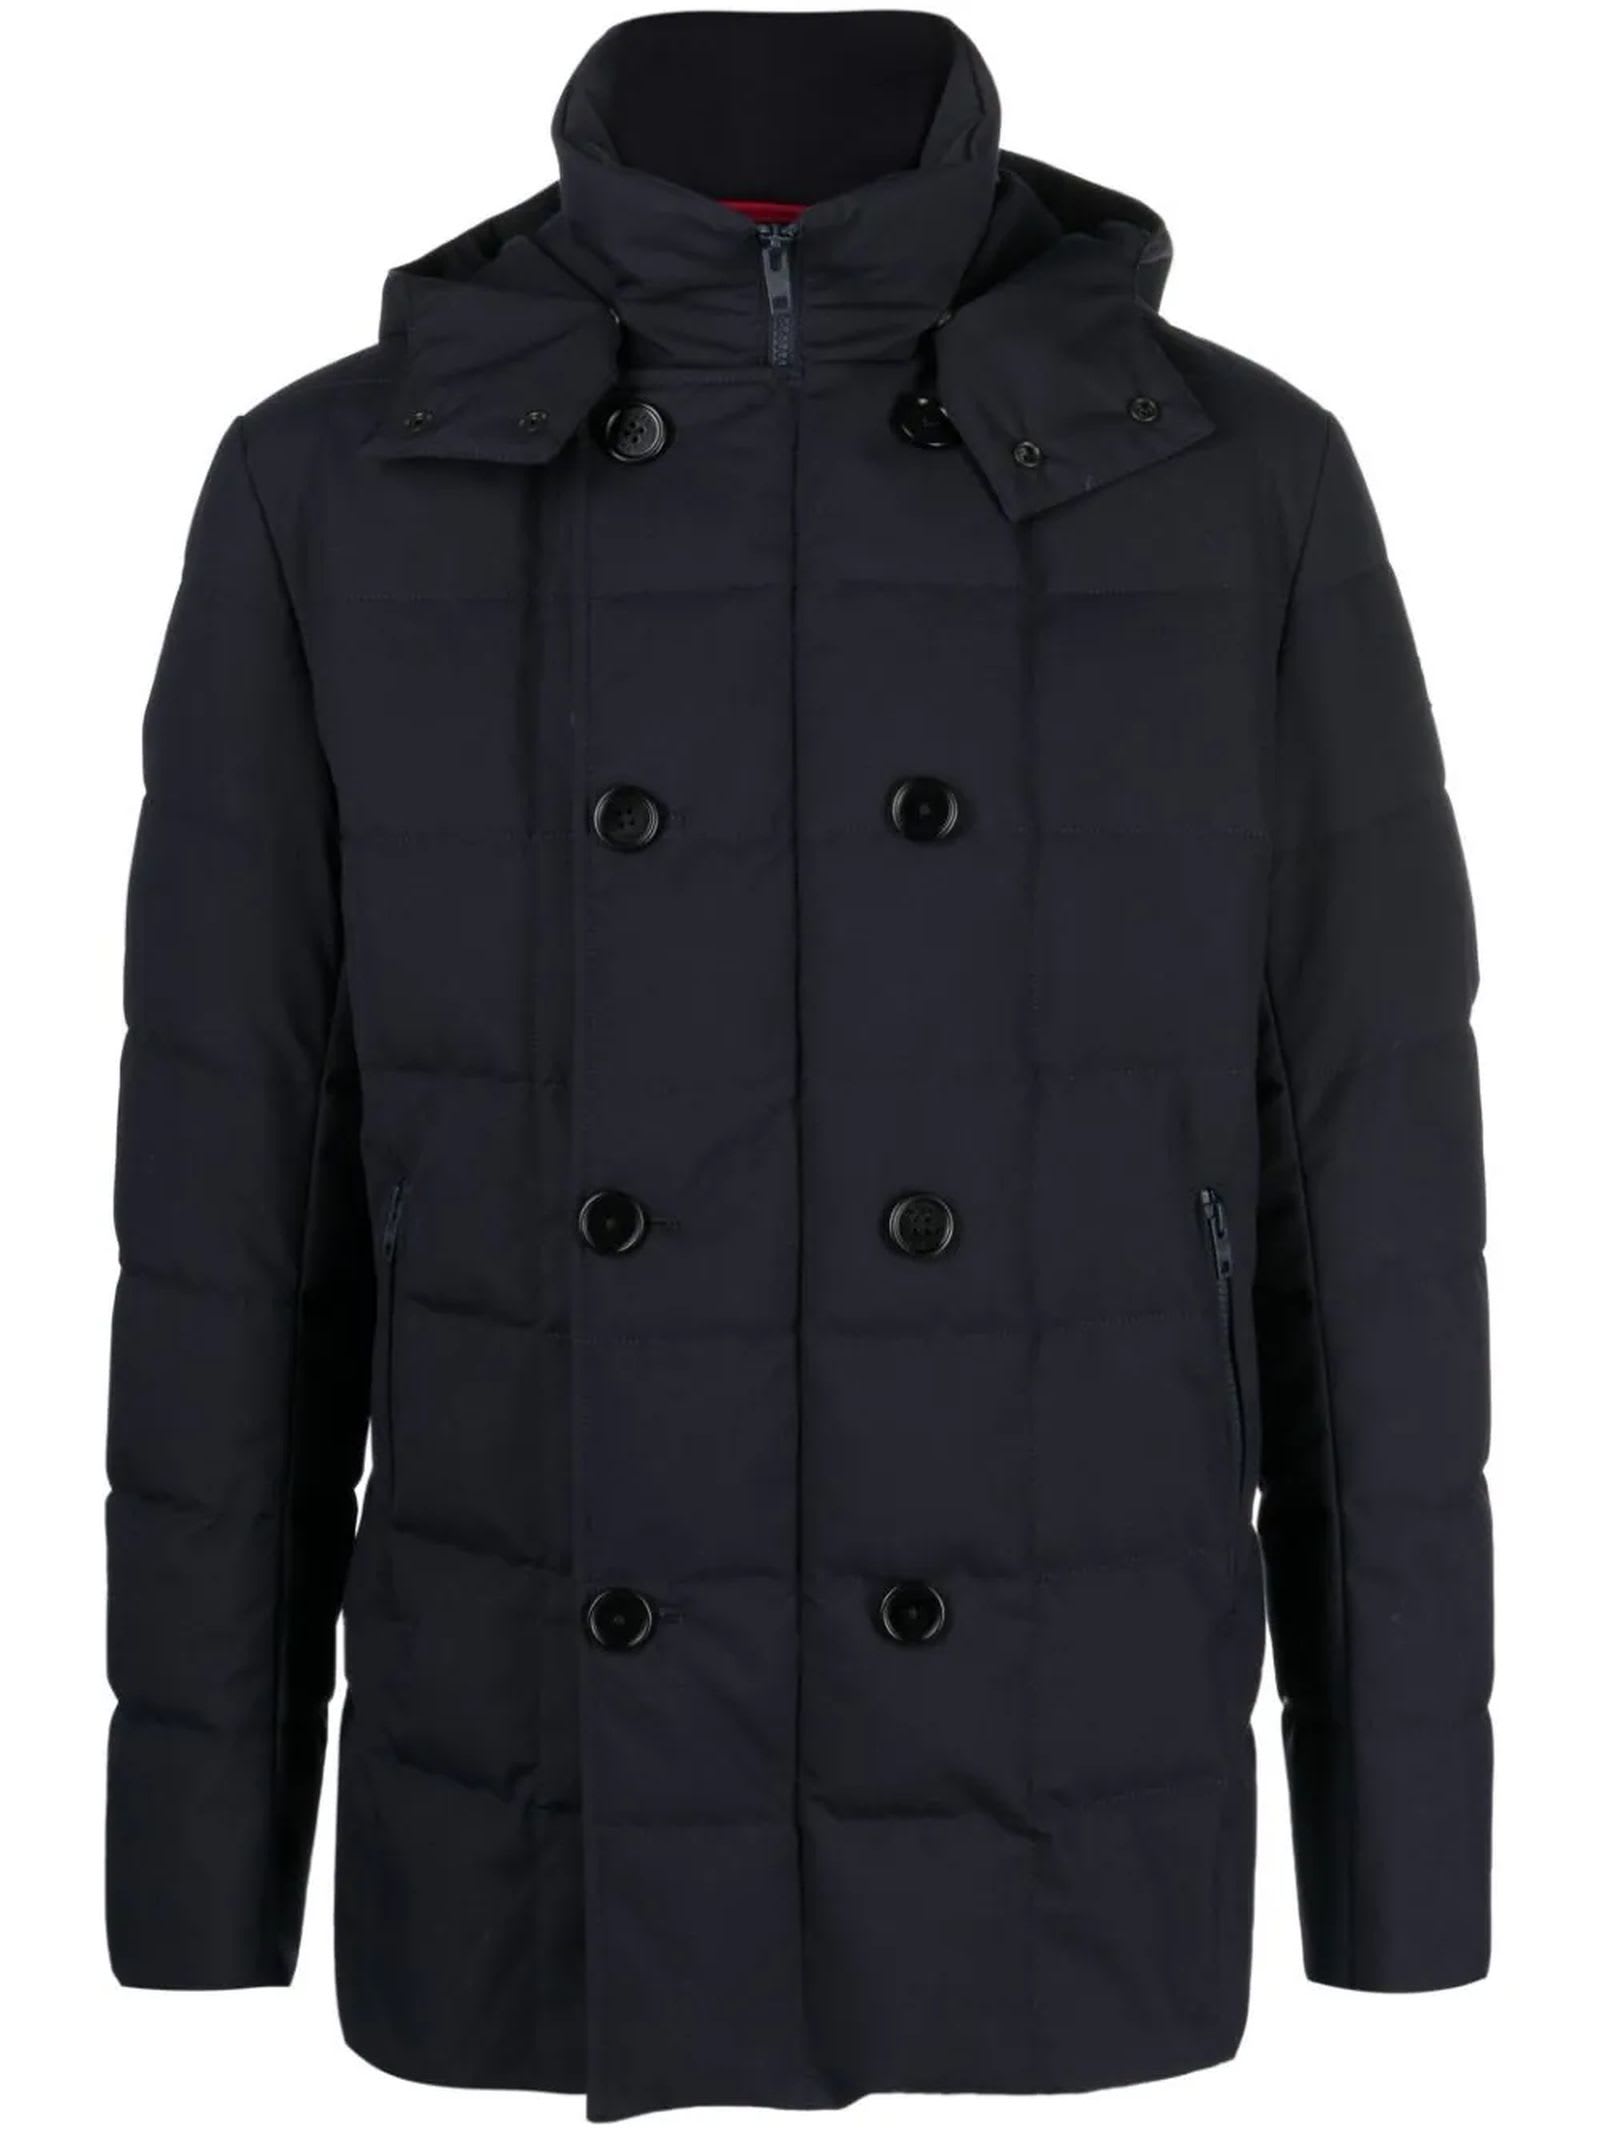 FAY NAVY BLUE DUCK FEATHER PADDED JACKET